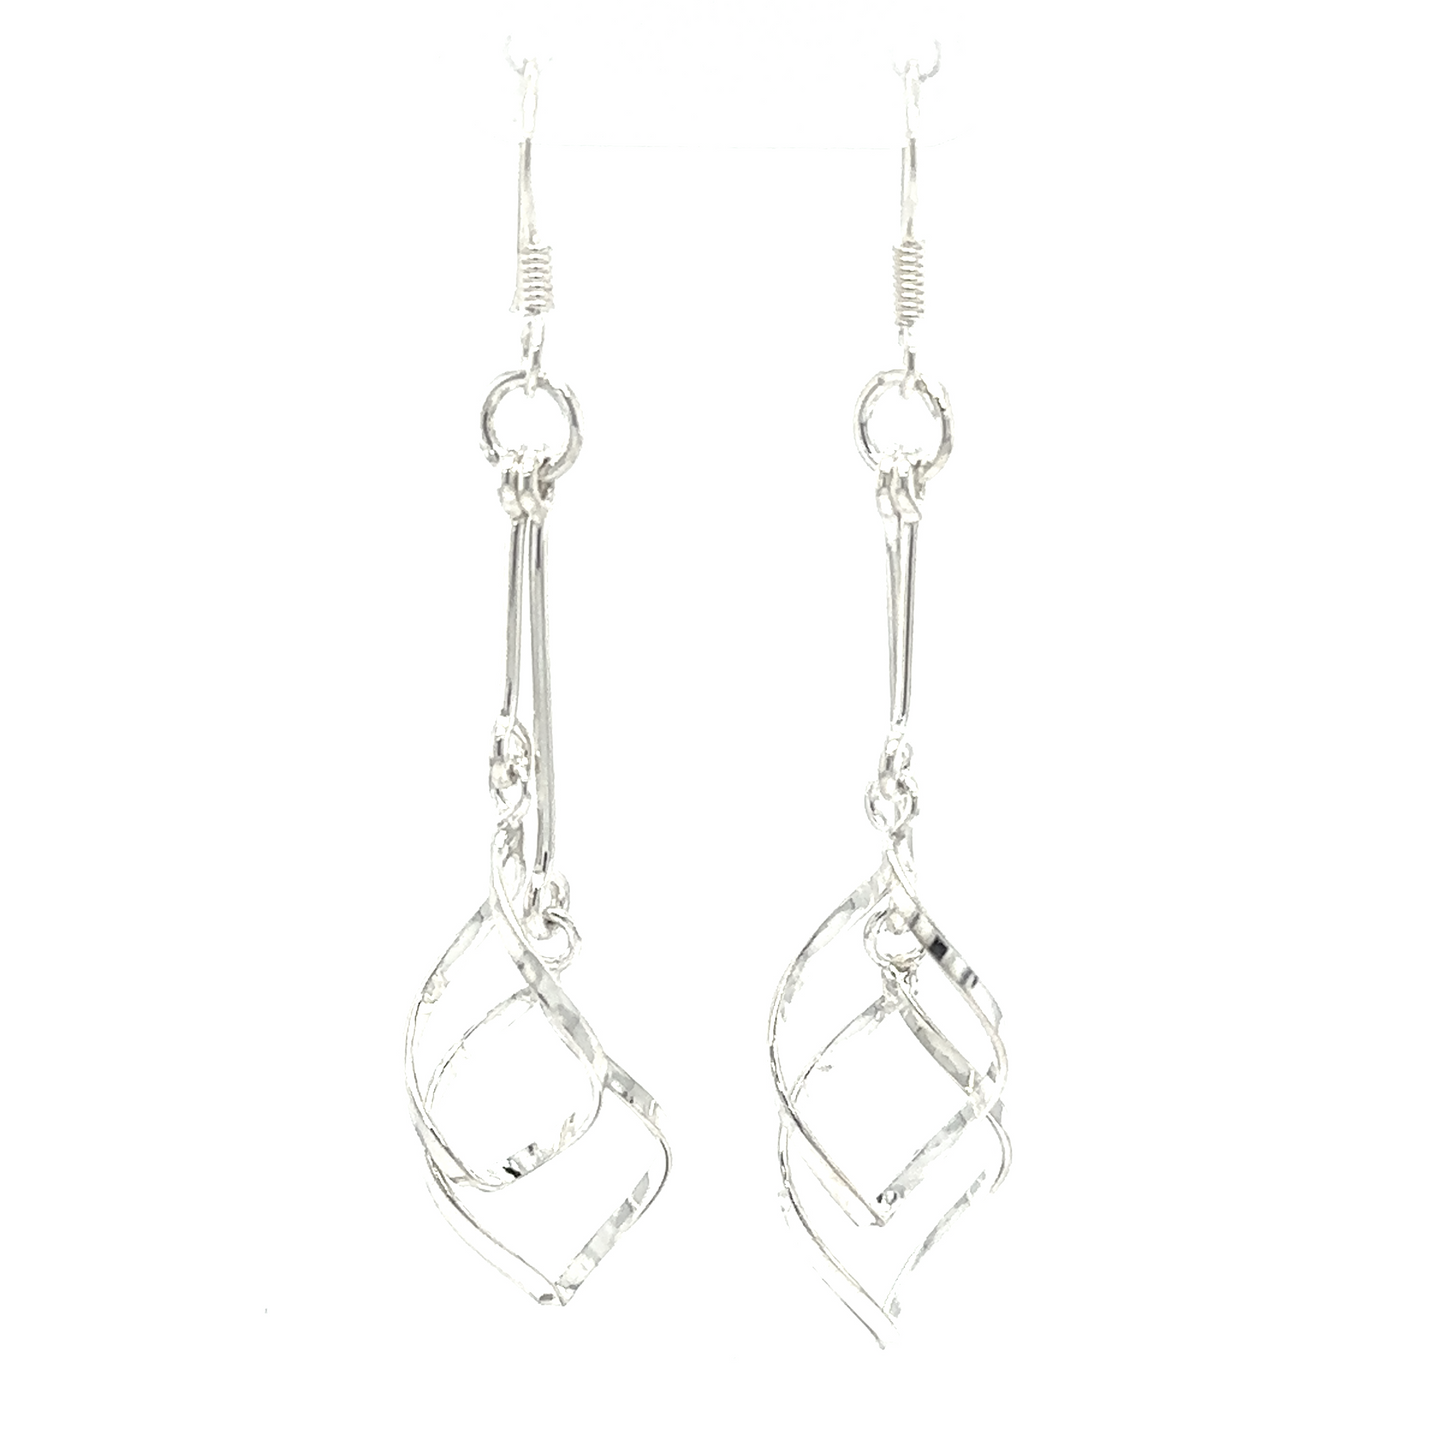 A pair of Delicate Twisted Freeform earrings that sparkle on a white background.